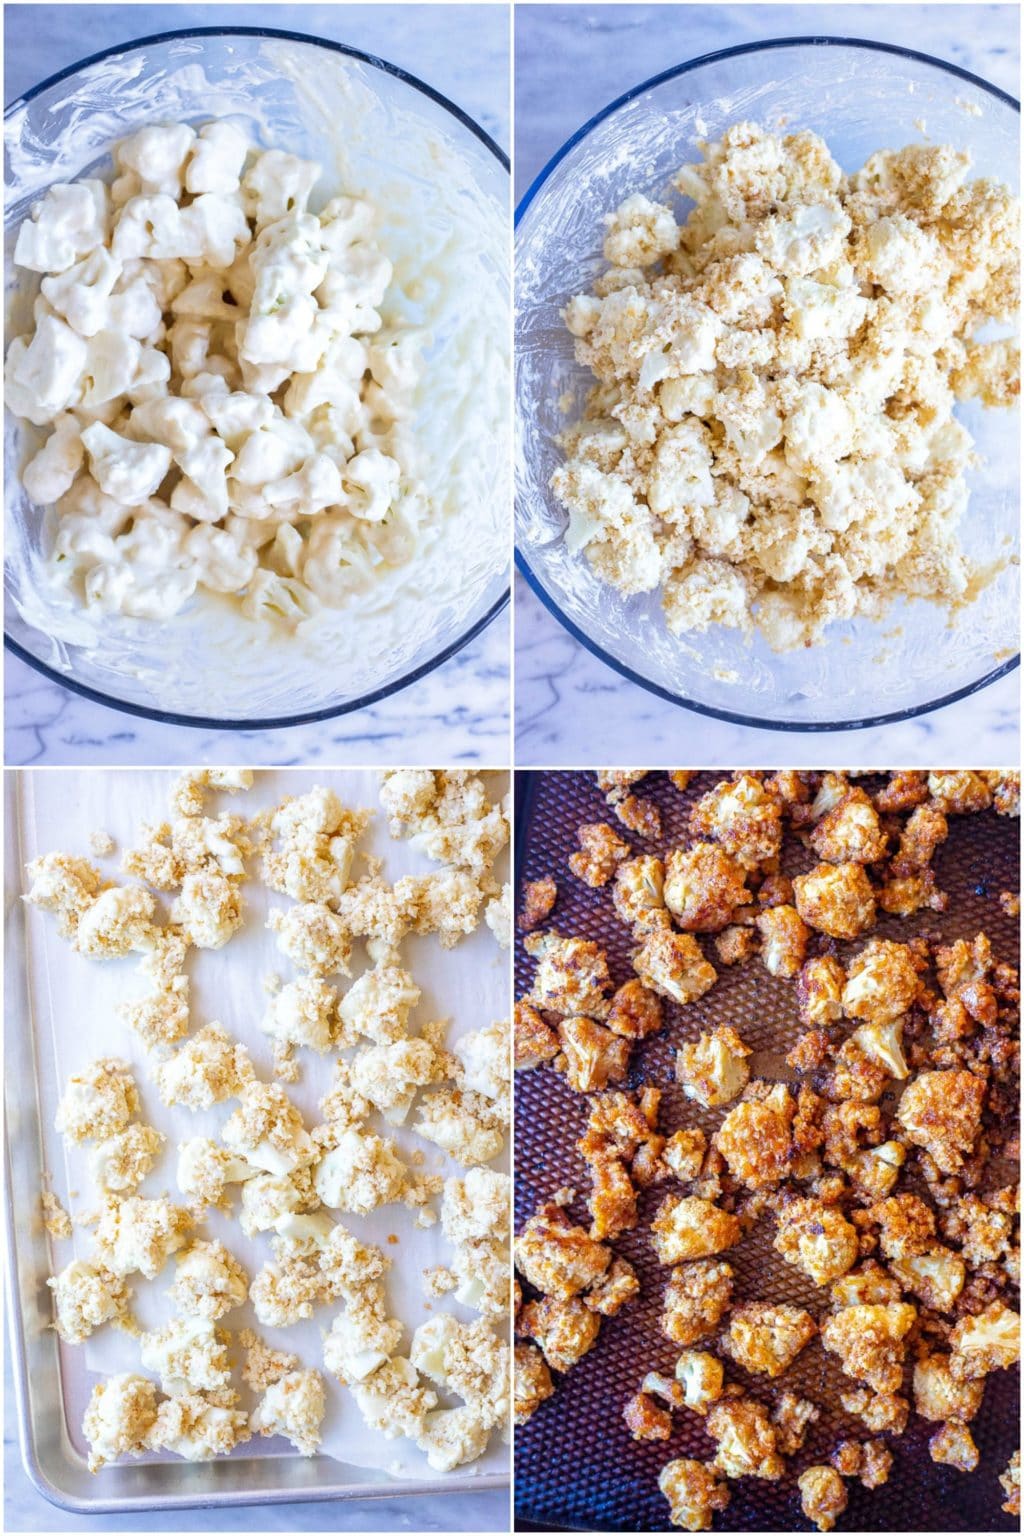 Step by step photos showing how to make this Sticky Lemon Cauliflower Recipe